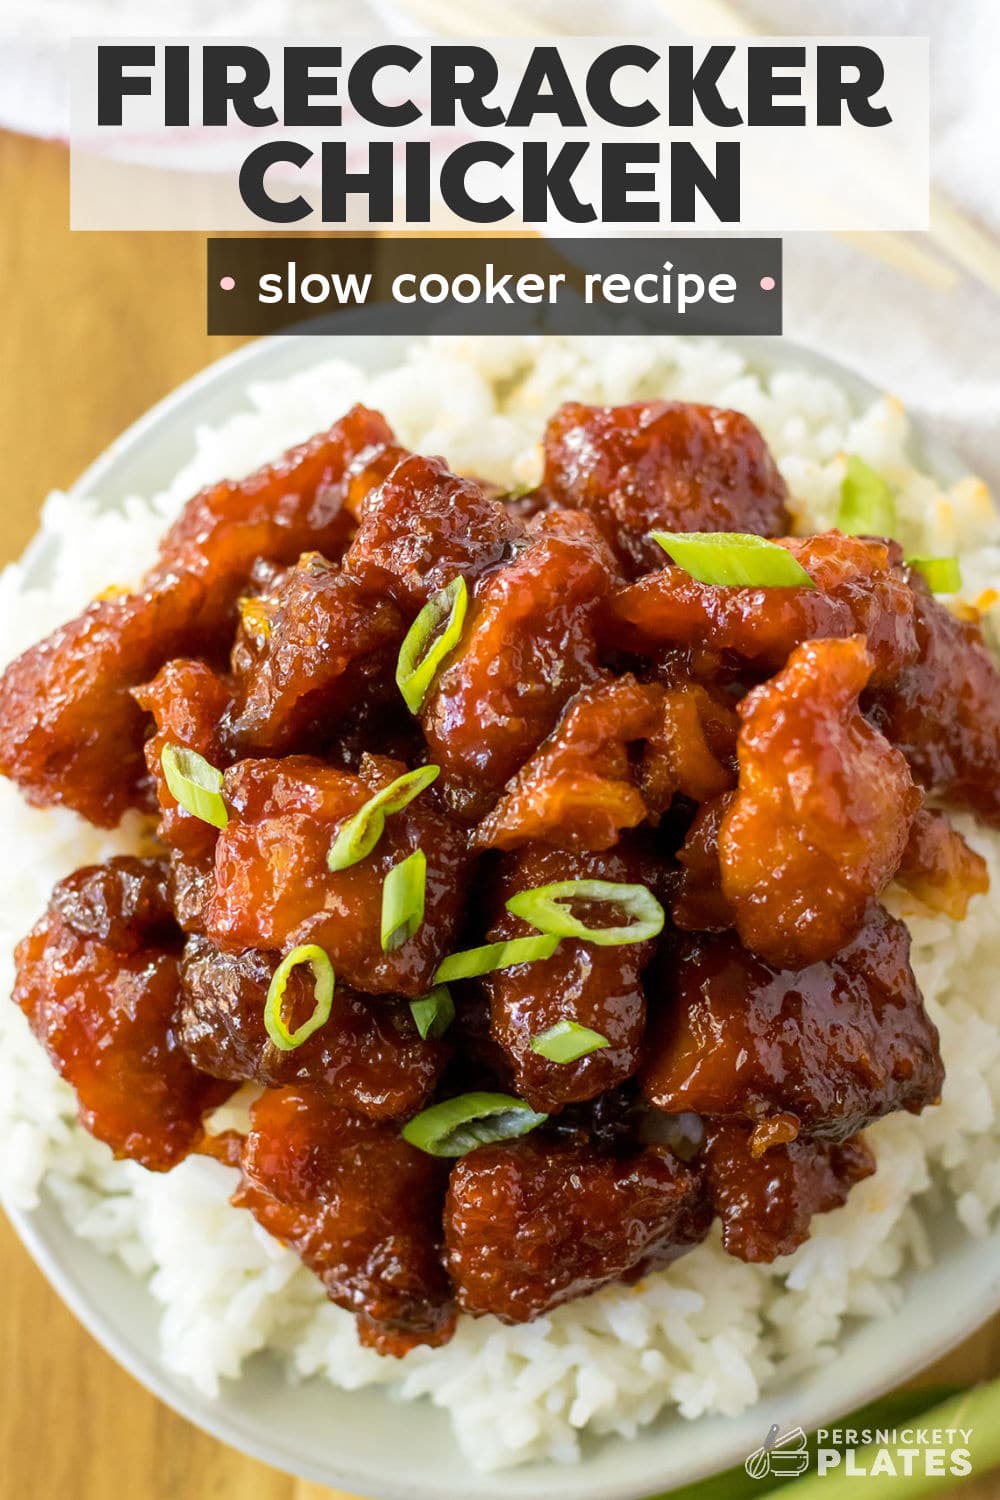 Slow cooker firecracker chicken is an Asian-inspired dish jam packed with flavor and so easy to make! Cubes of juicy chicken bites browned and then slow cooked in a sweet, spicy, and tangy sauce. This dish is made right in the crockpot so you can set it and forget it, allowing the flavors to meld together and the chicken to become perfectly juicy and tender. | www.persnicketyplates.com